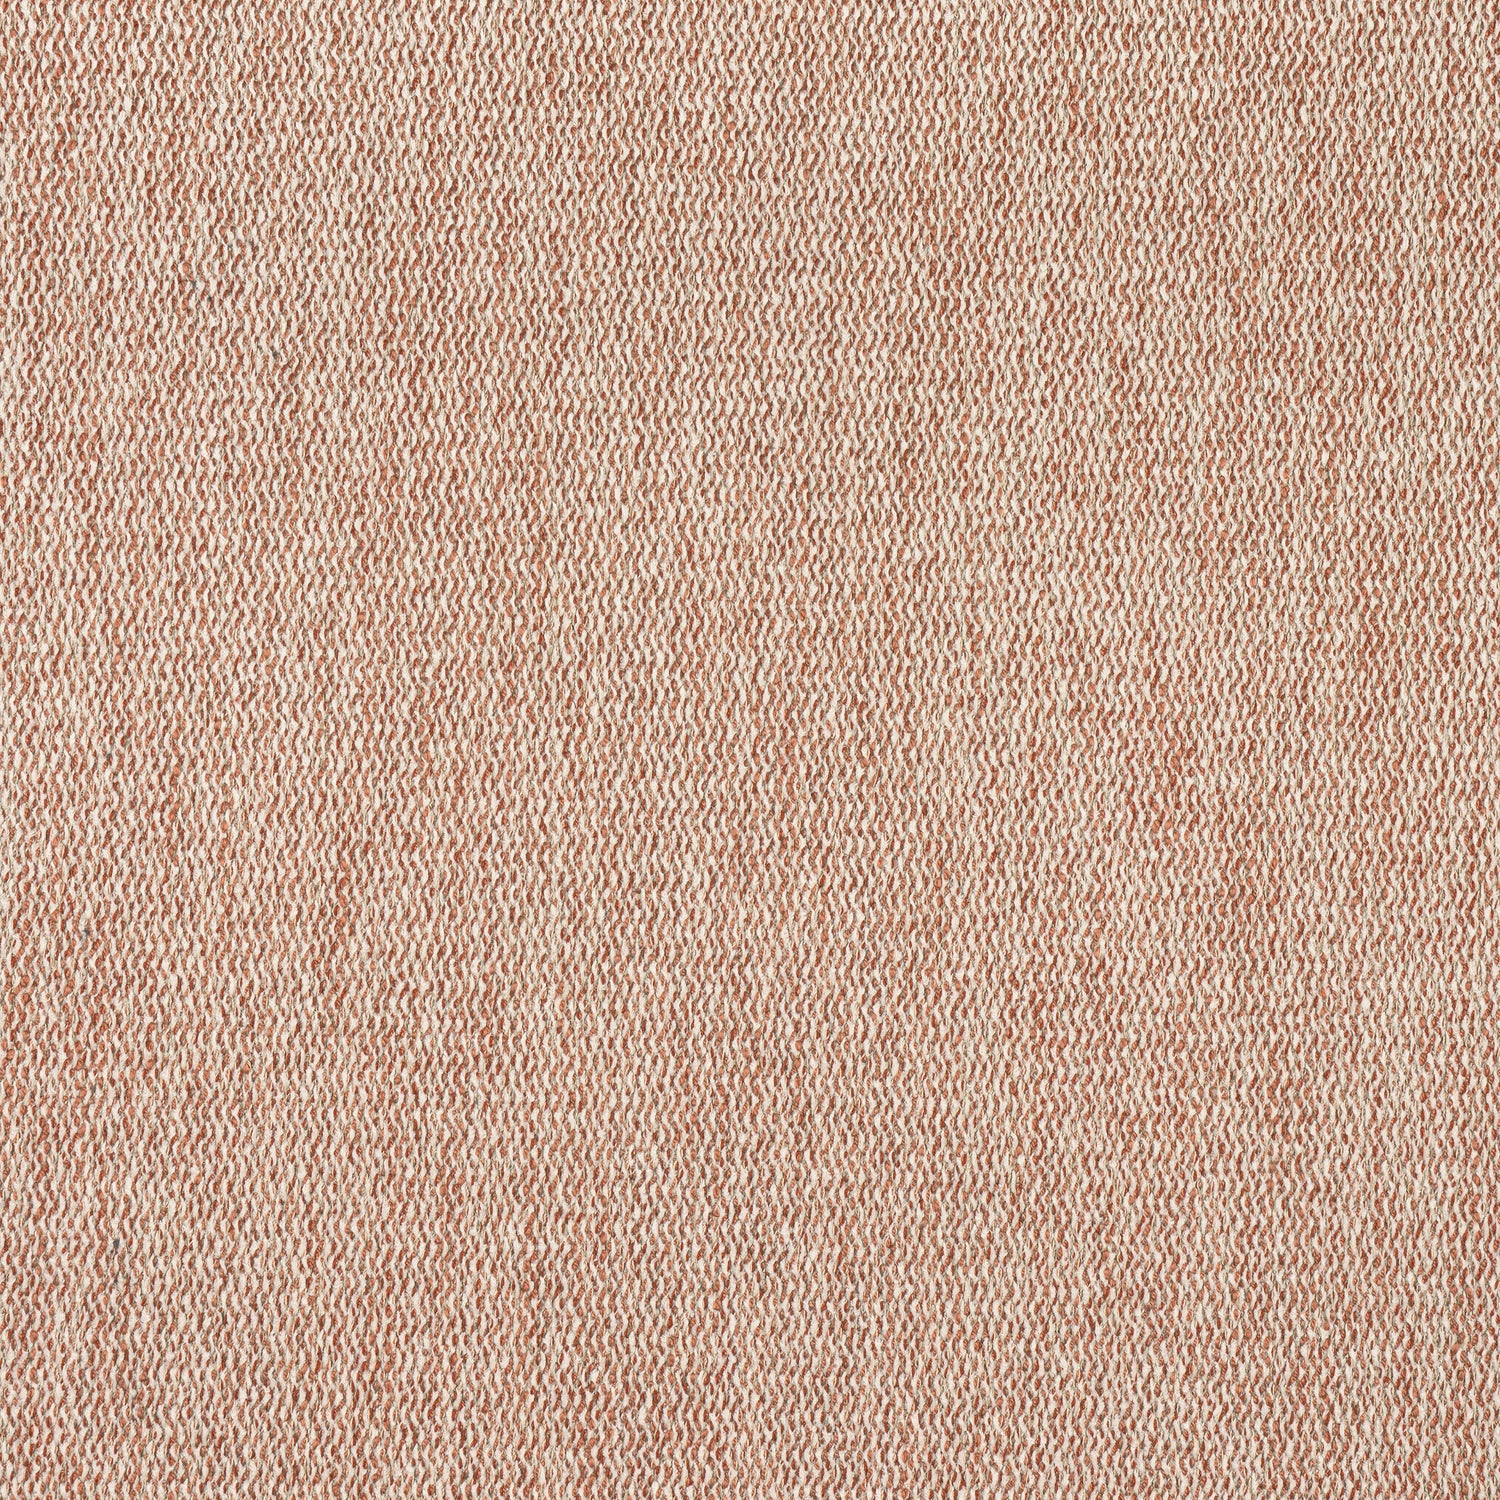 Arroyo fabric in clay color - pattern number W8783 - by Thibaut in the Haven Textures collection